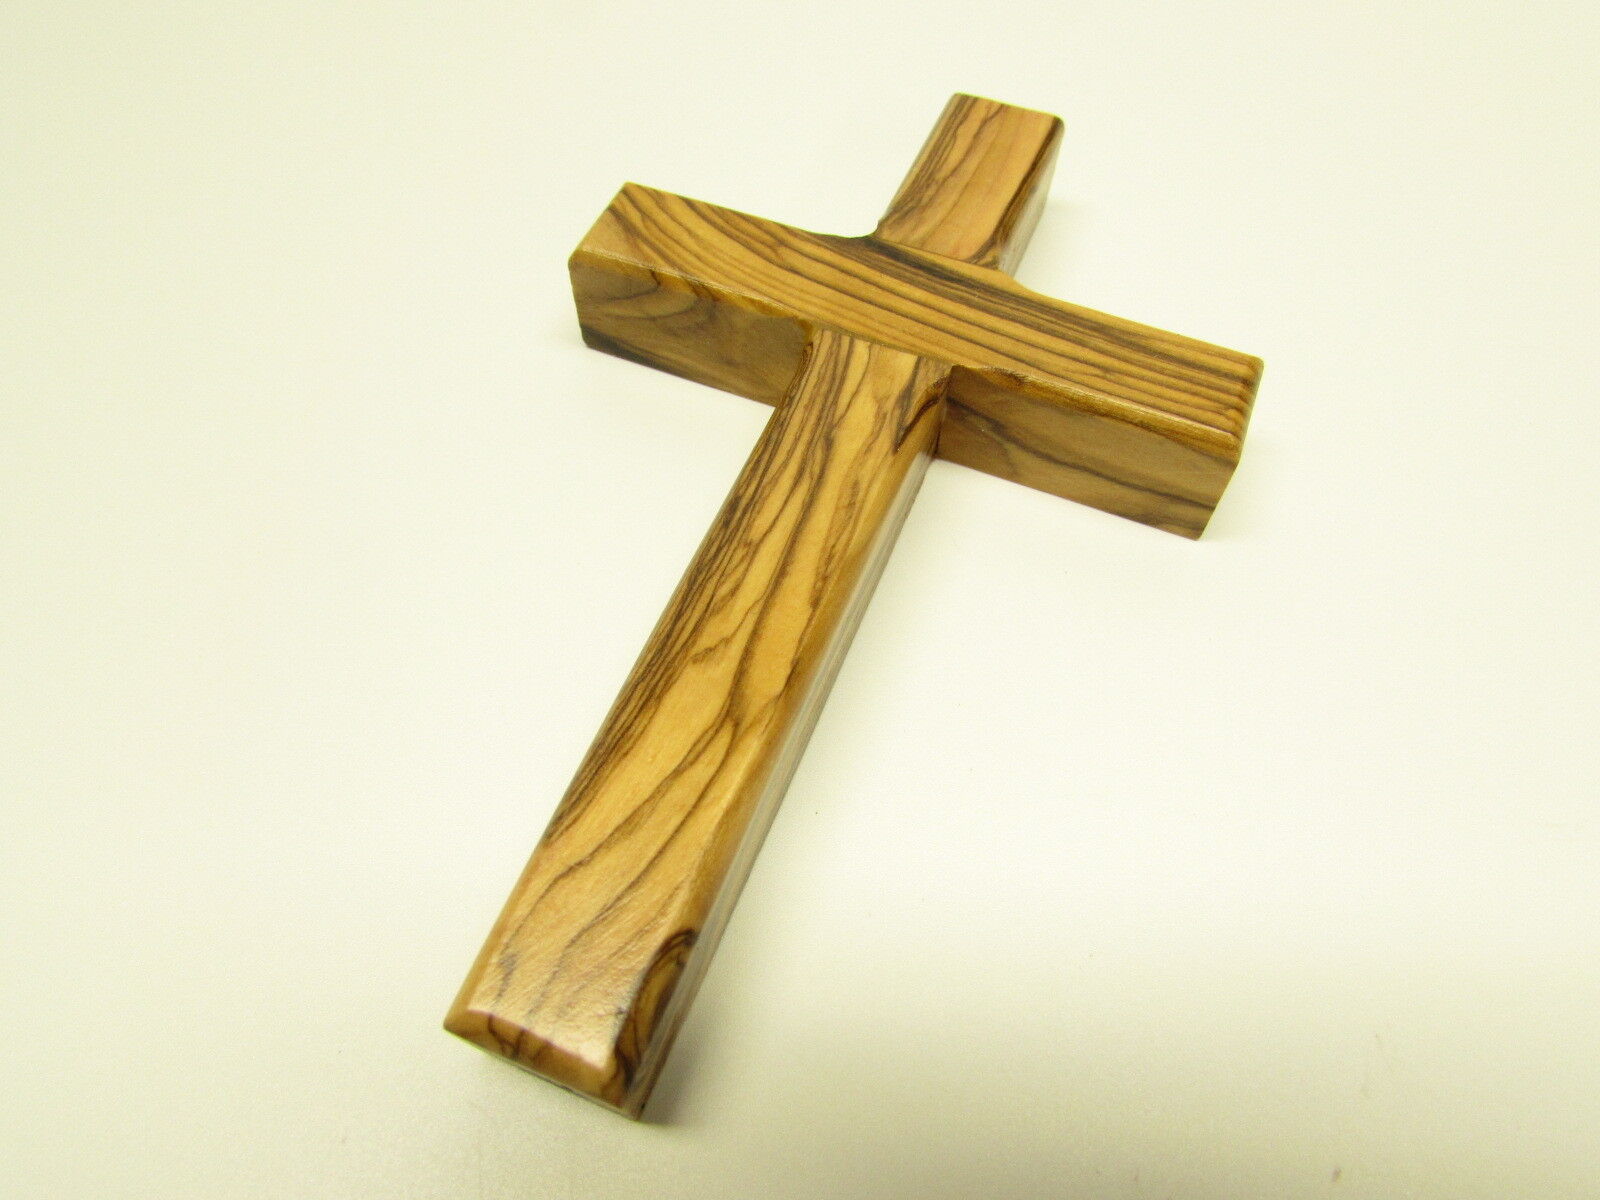 Olive Wood Christian Wall Cross - Hand Made in the Holy Land - Jerusalem